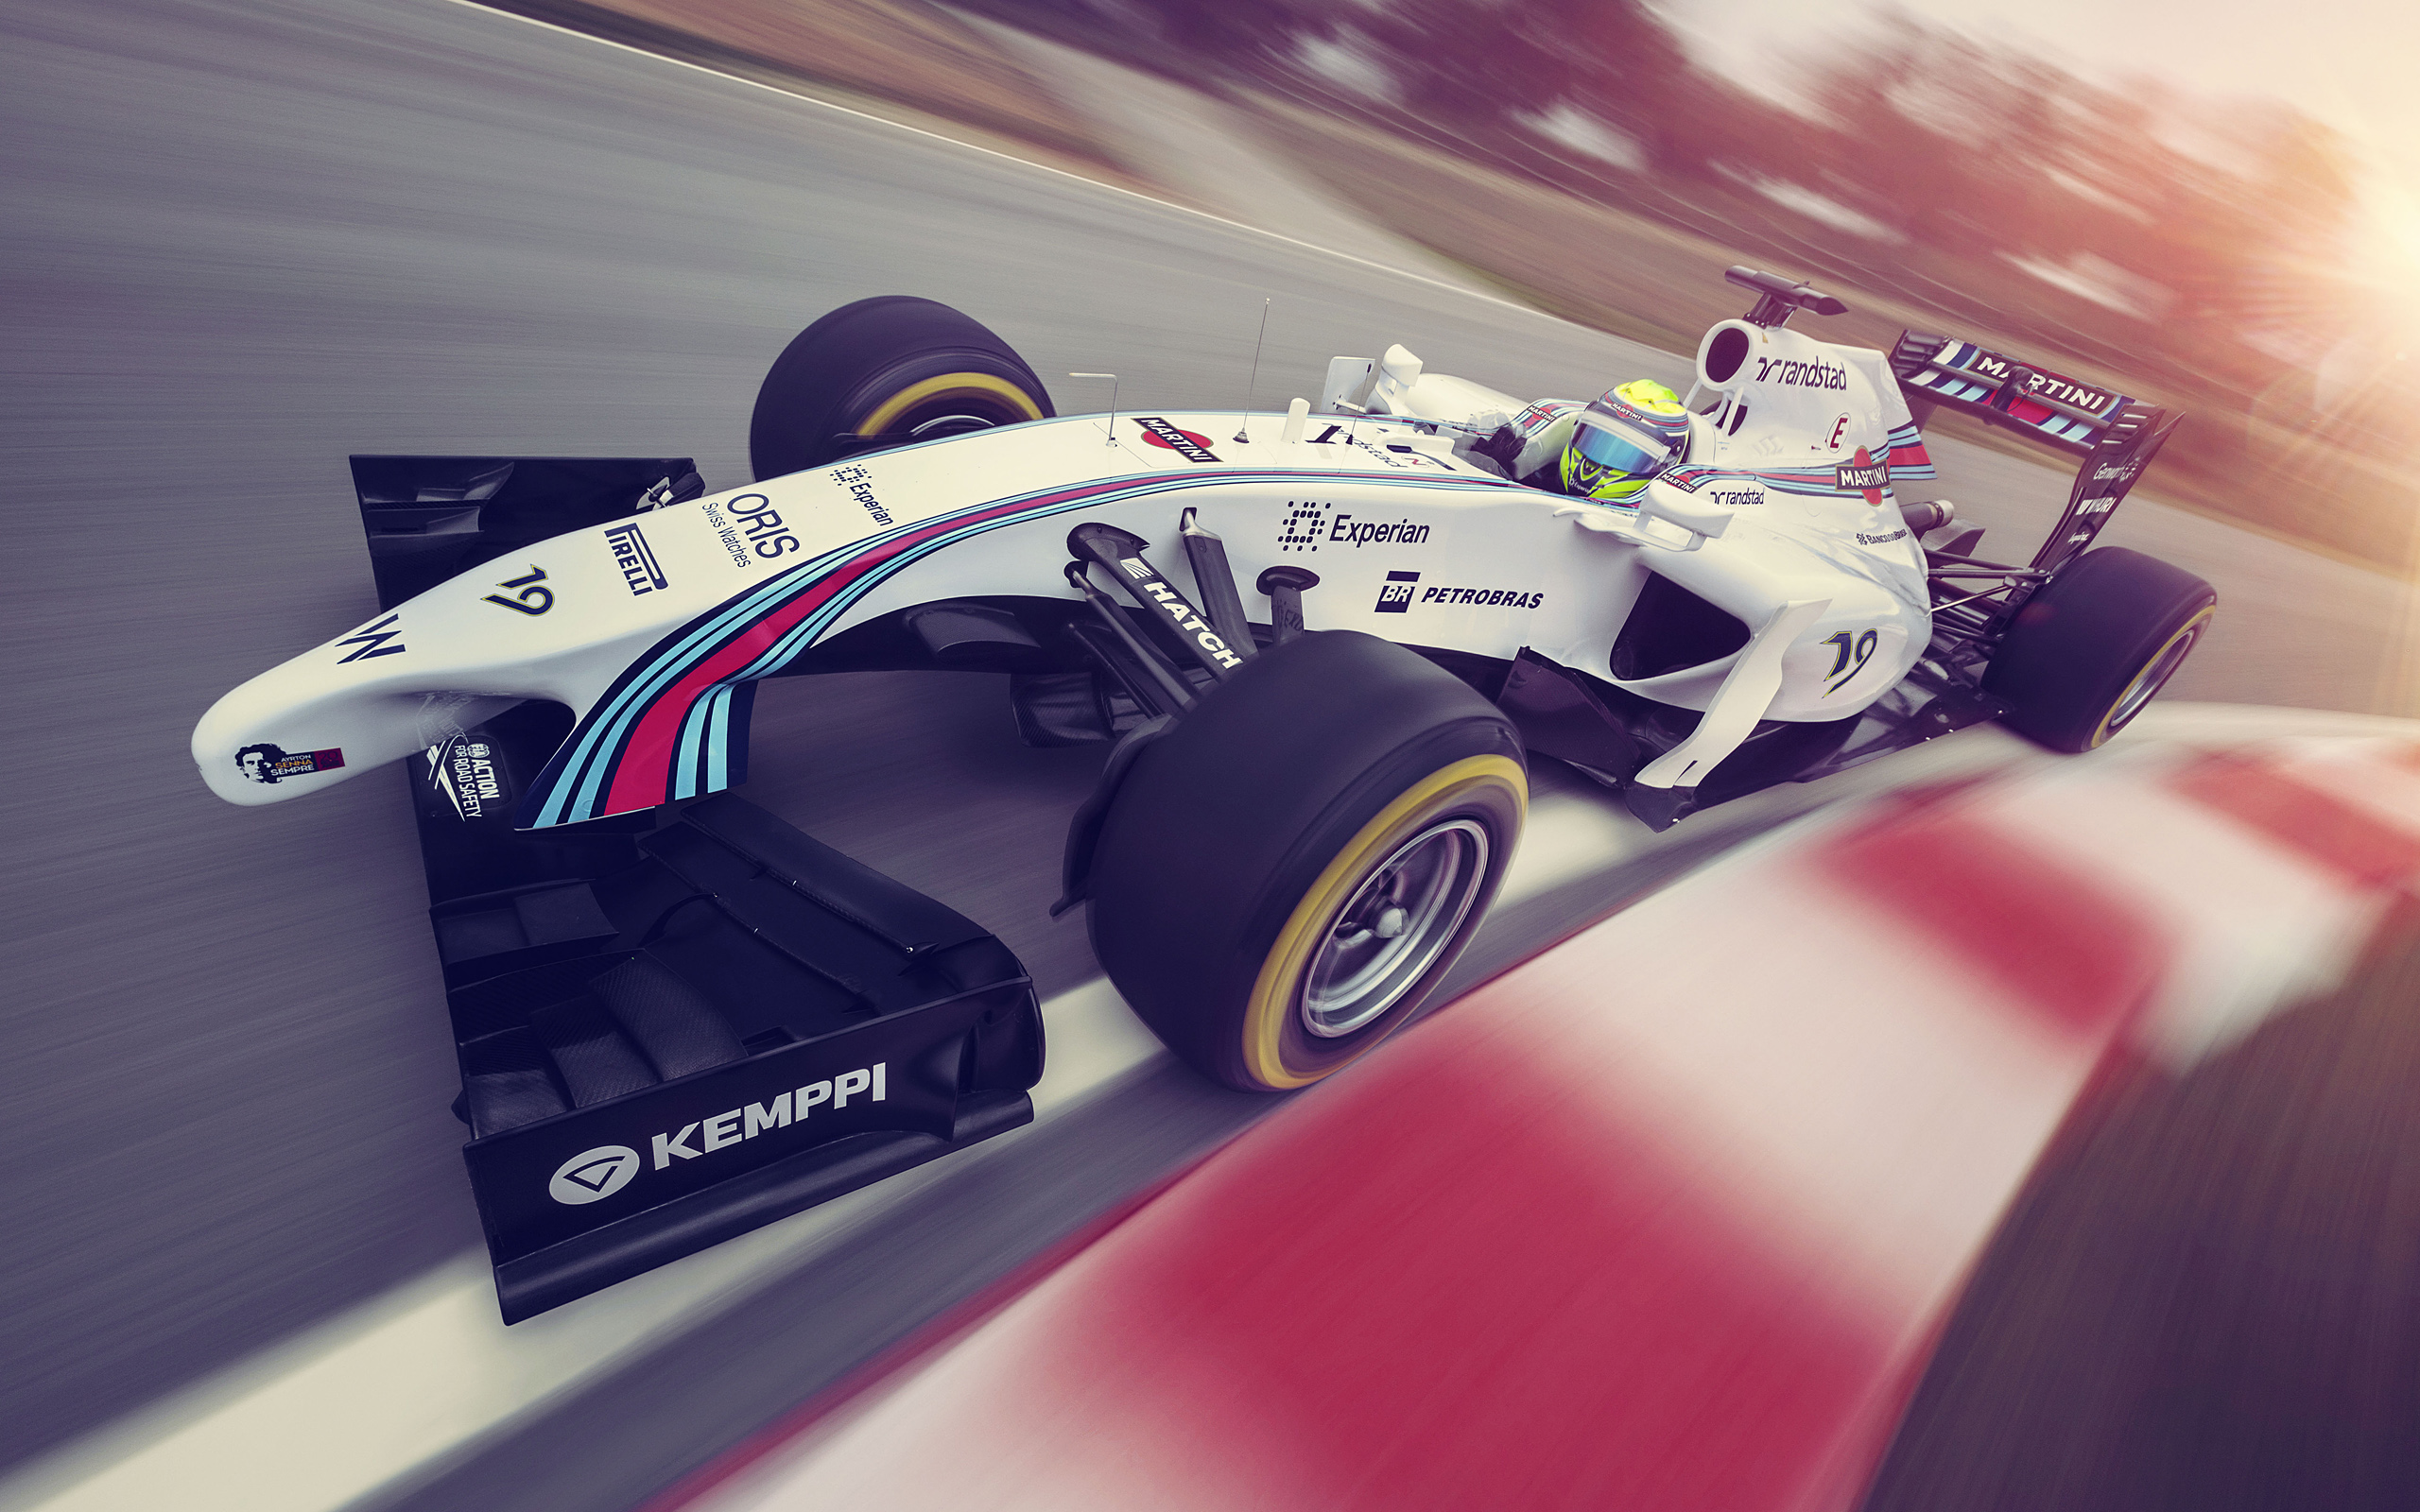 Williams F1 wallpapers for desktop, download free Williams F1 pictures and  backgrounds for PC 